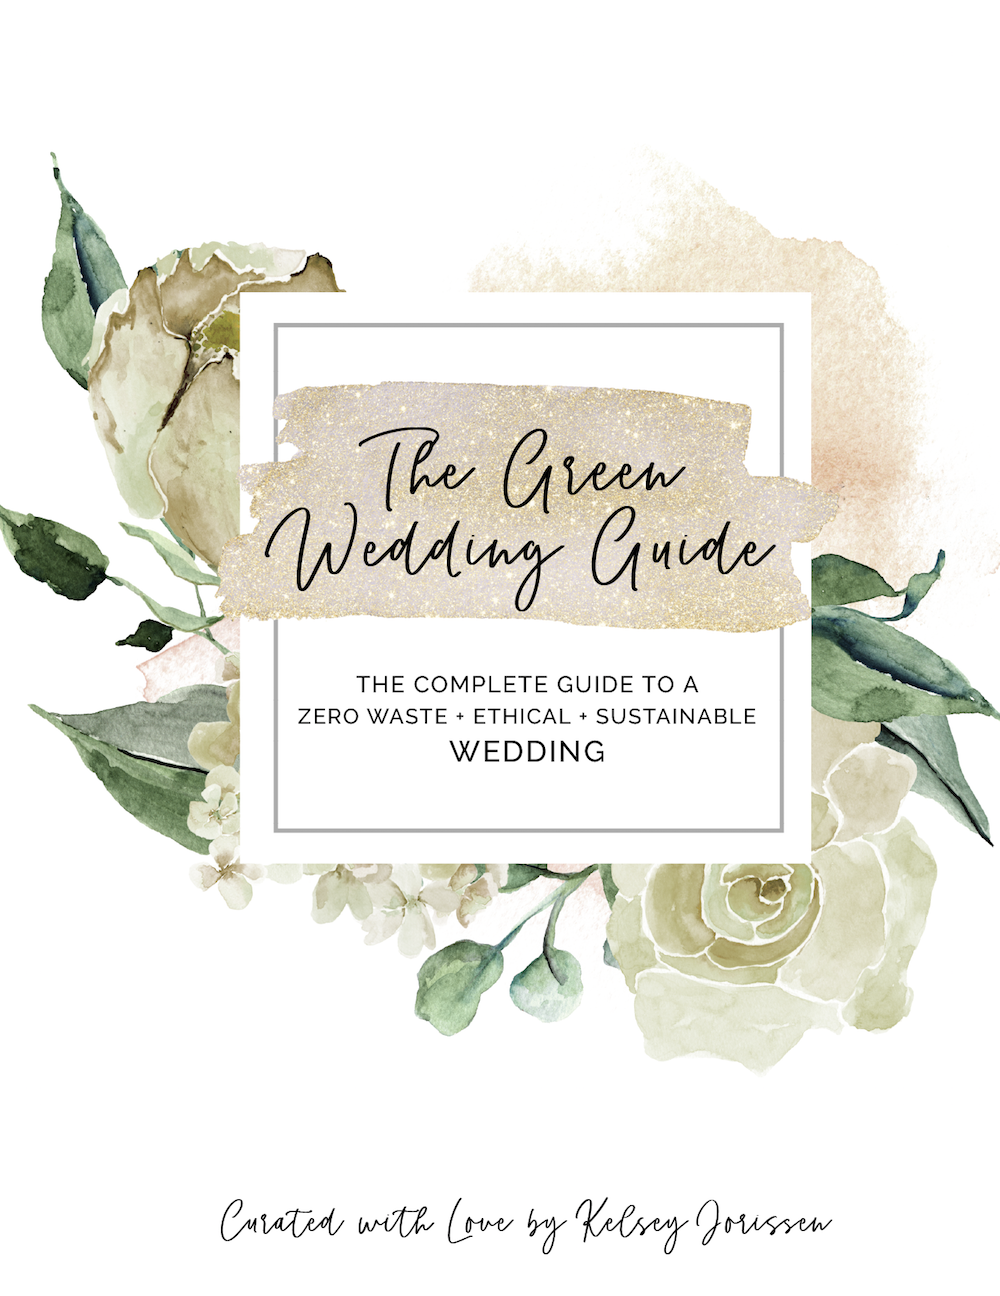 The Green Wedding Guide, how to have a zero waste and sustainable wedding